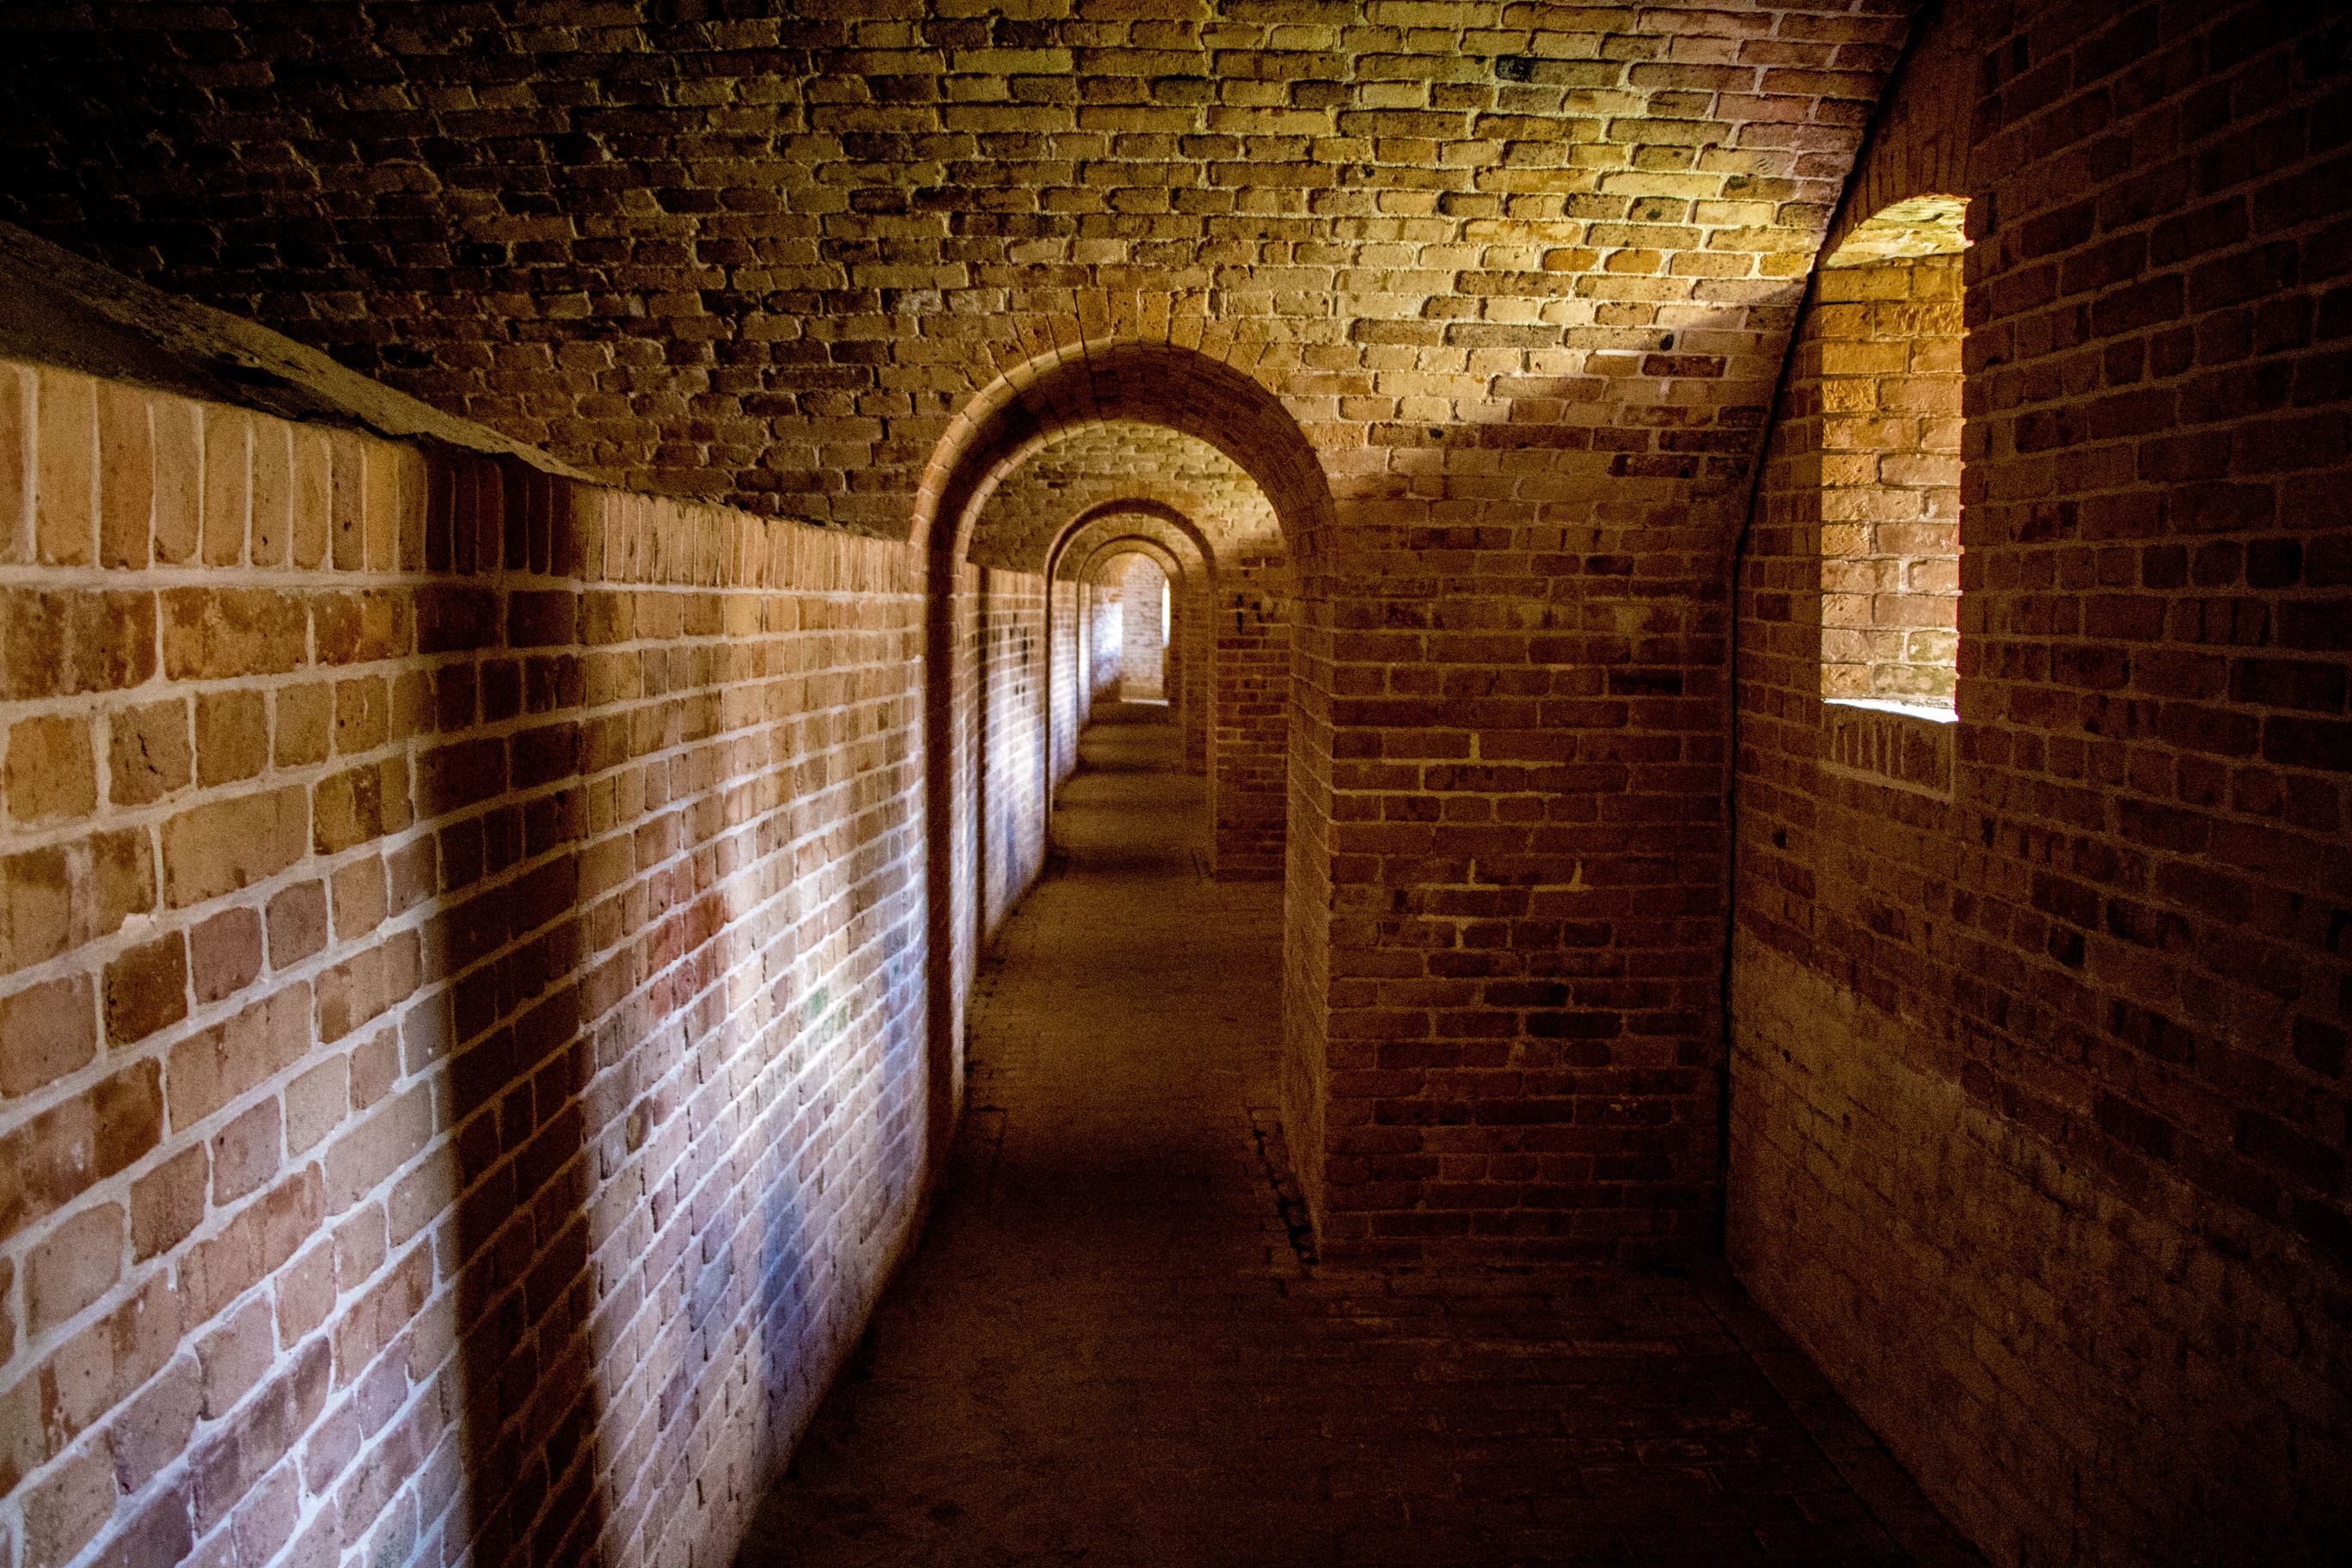 The sun shines through small loopholes (windows) into a brick arched gallery.